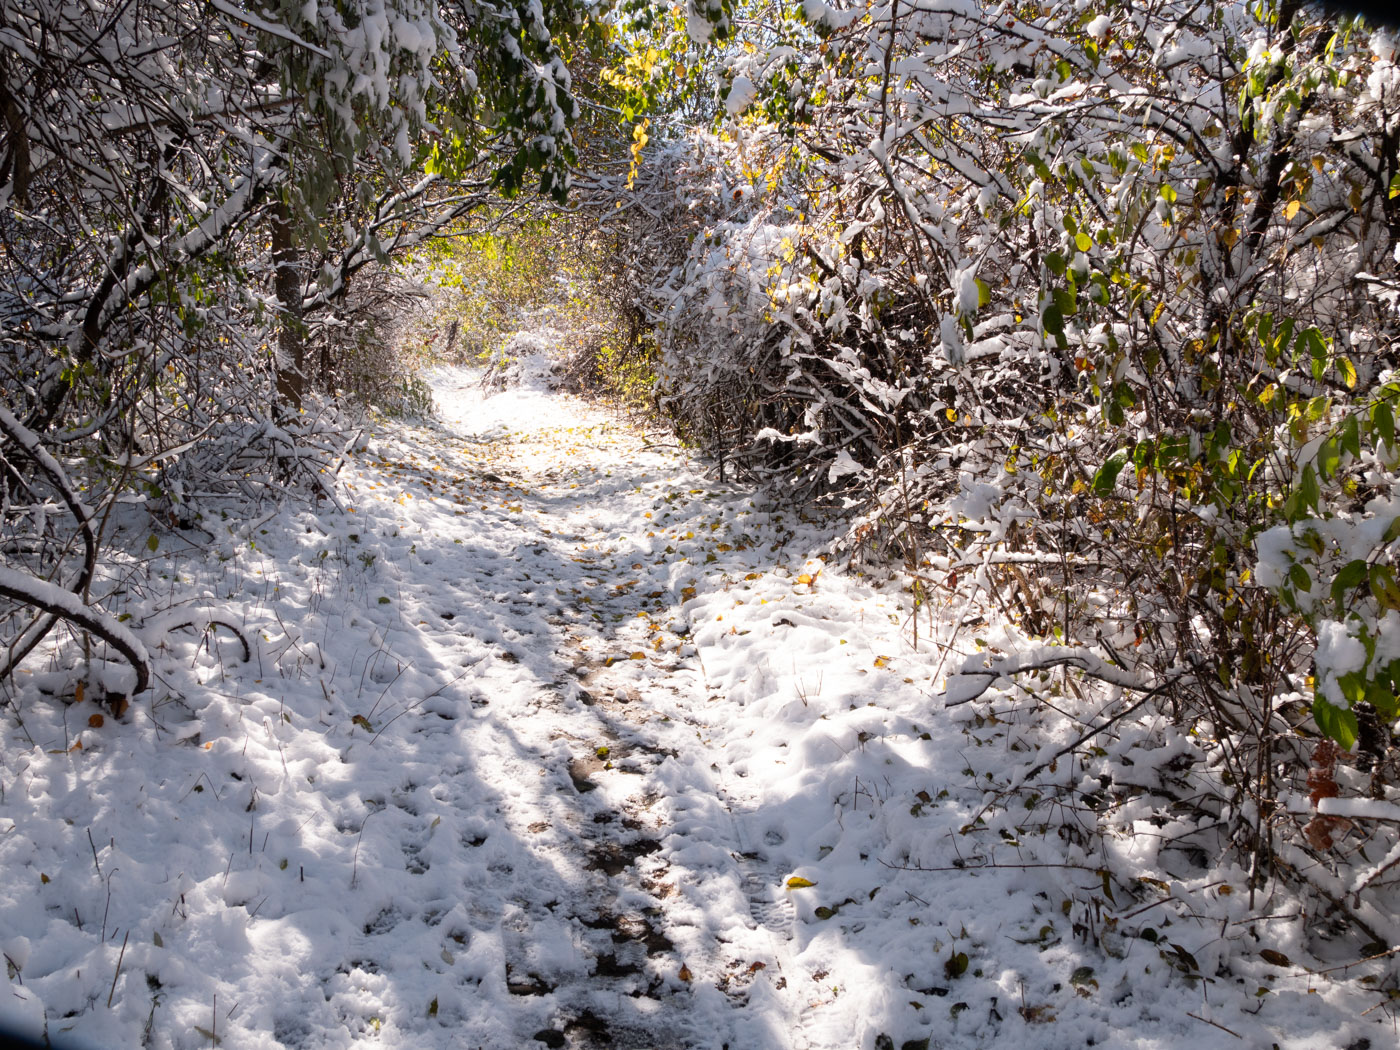 The Tunnel Trail with snow and still-green boughs.